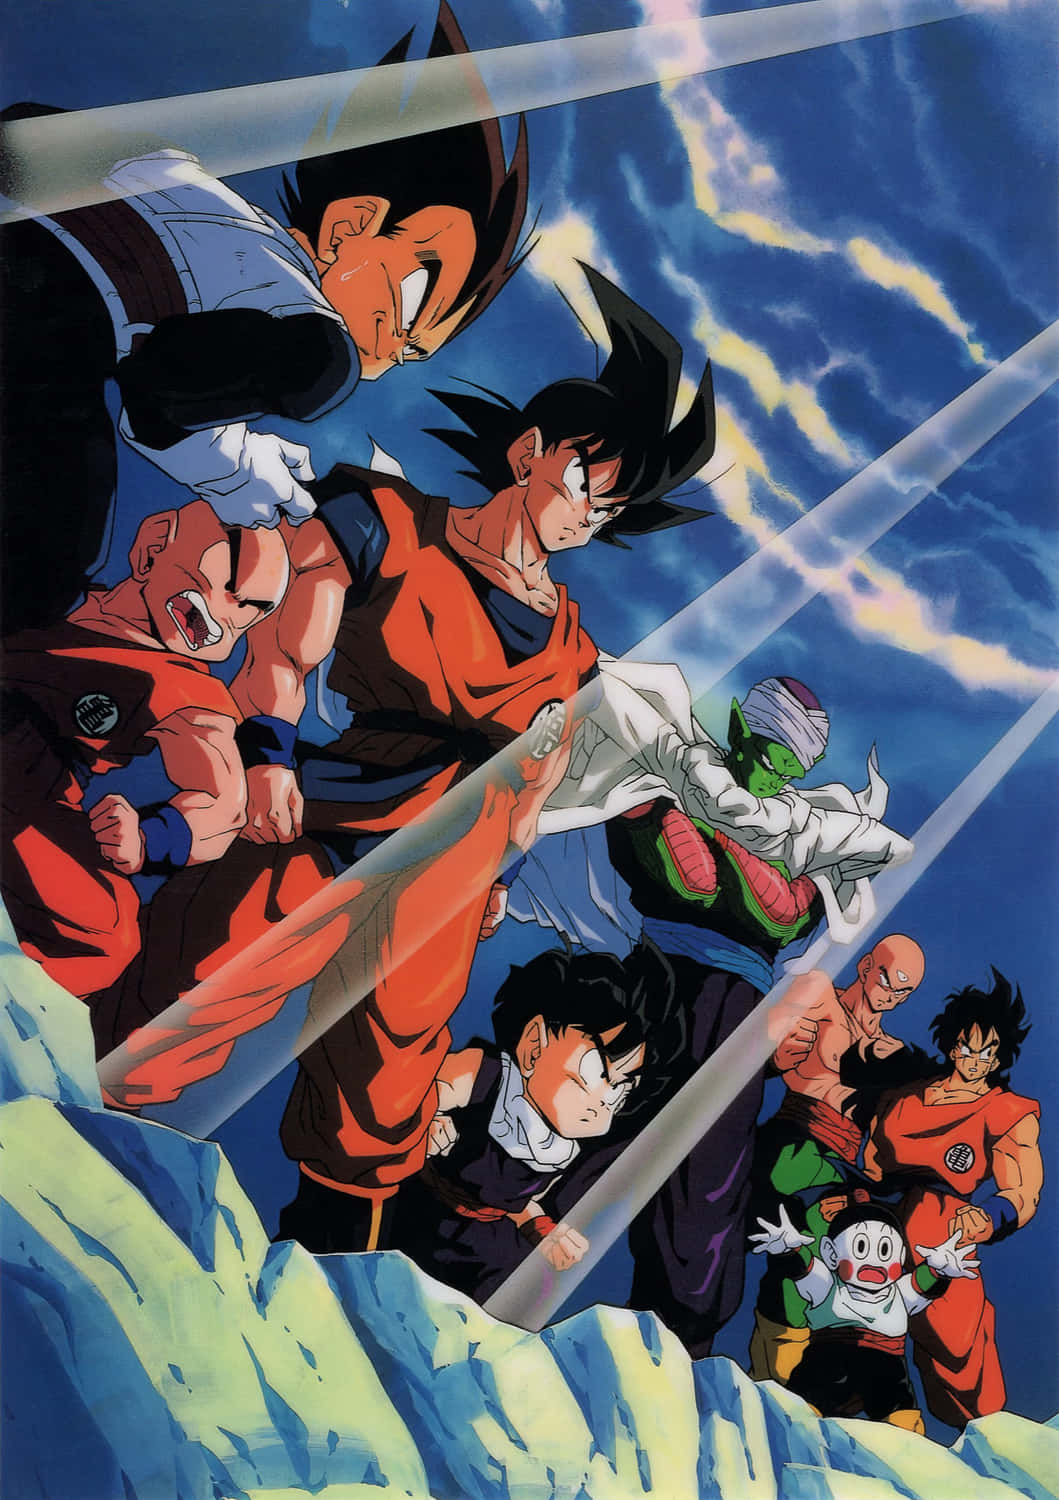 Goku and Vegeta, long-time rivals, stand together in this iPhone wallpaper. Wallpaper